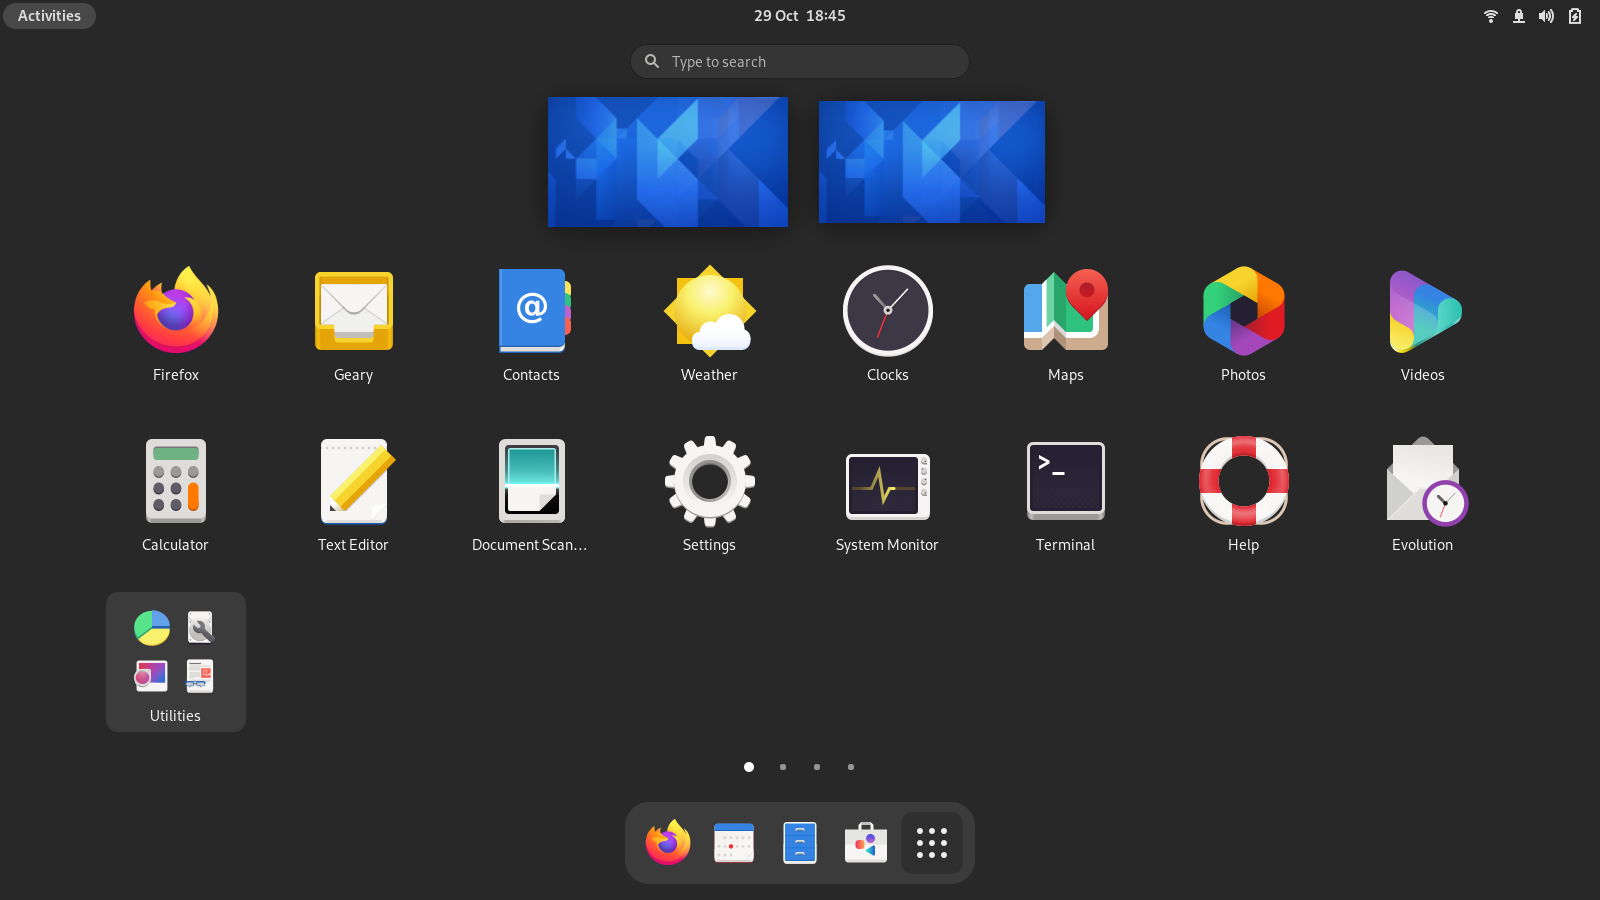 Applications overview in GNOME